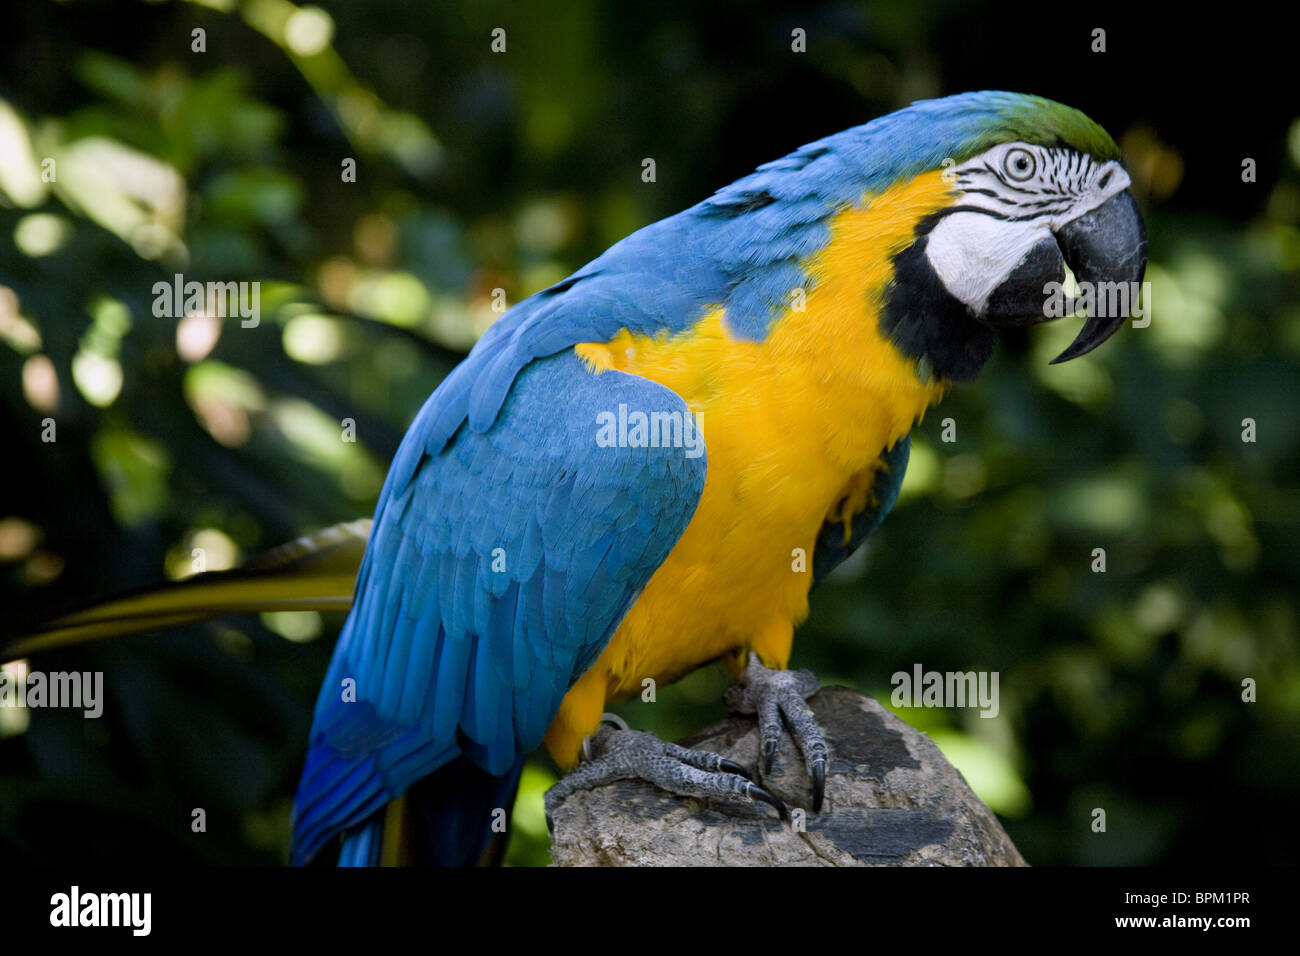 Right side close up picture of blue of yellow Macaw, a specie of parrot. Stock Photo